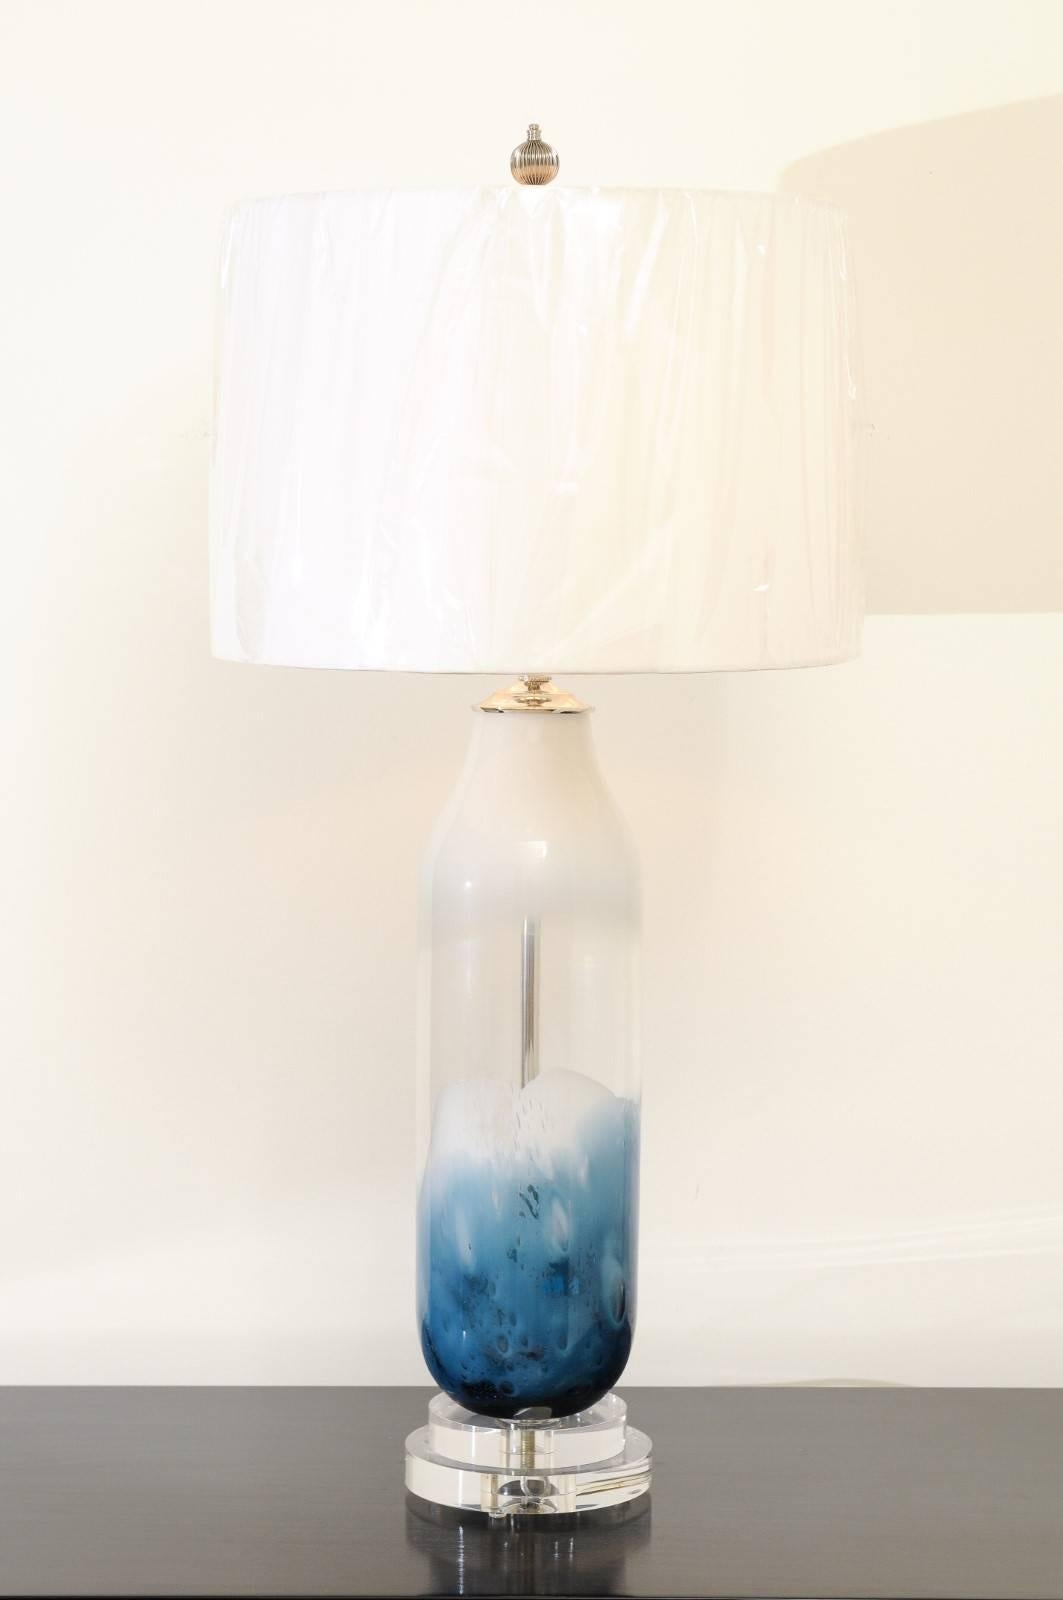 A Killer pair of large-scale Italian glass vessels, circa 1980, as newly built custom lamps. Beautiful slender form with swirl accent colors in blue and cream which recall clouds. Stellar pieces exactingly constructed using components of only the